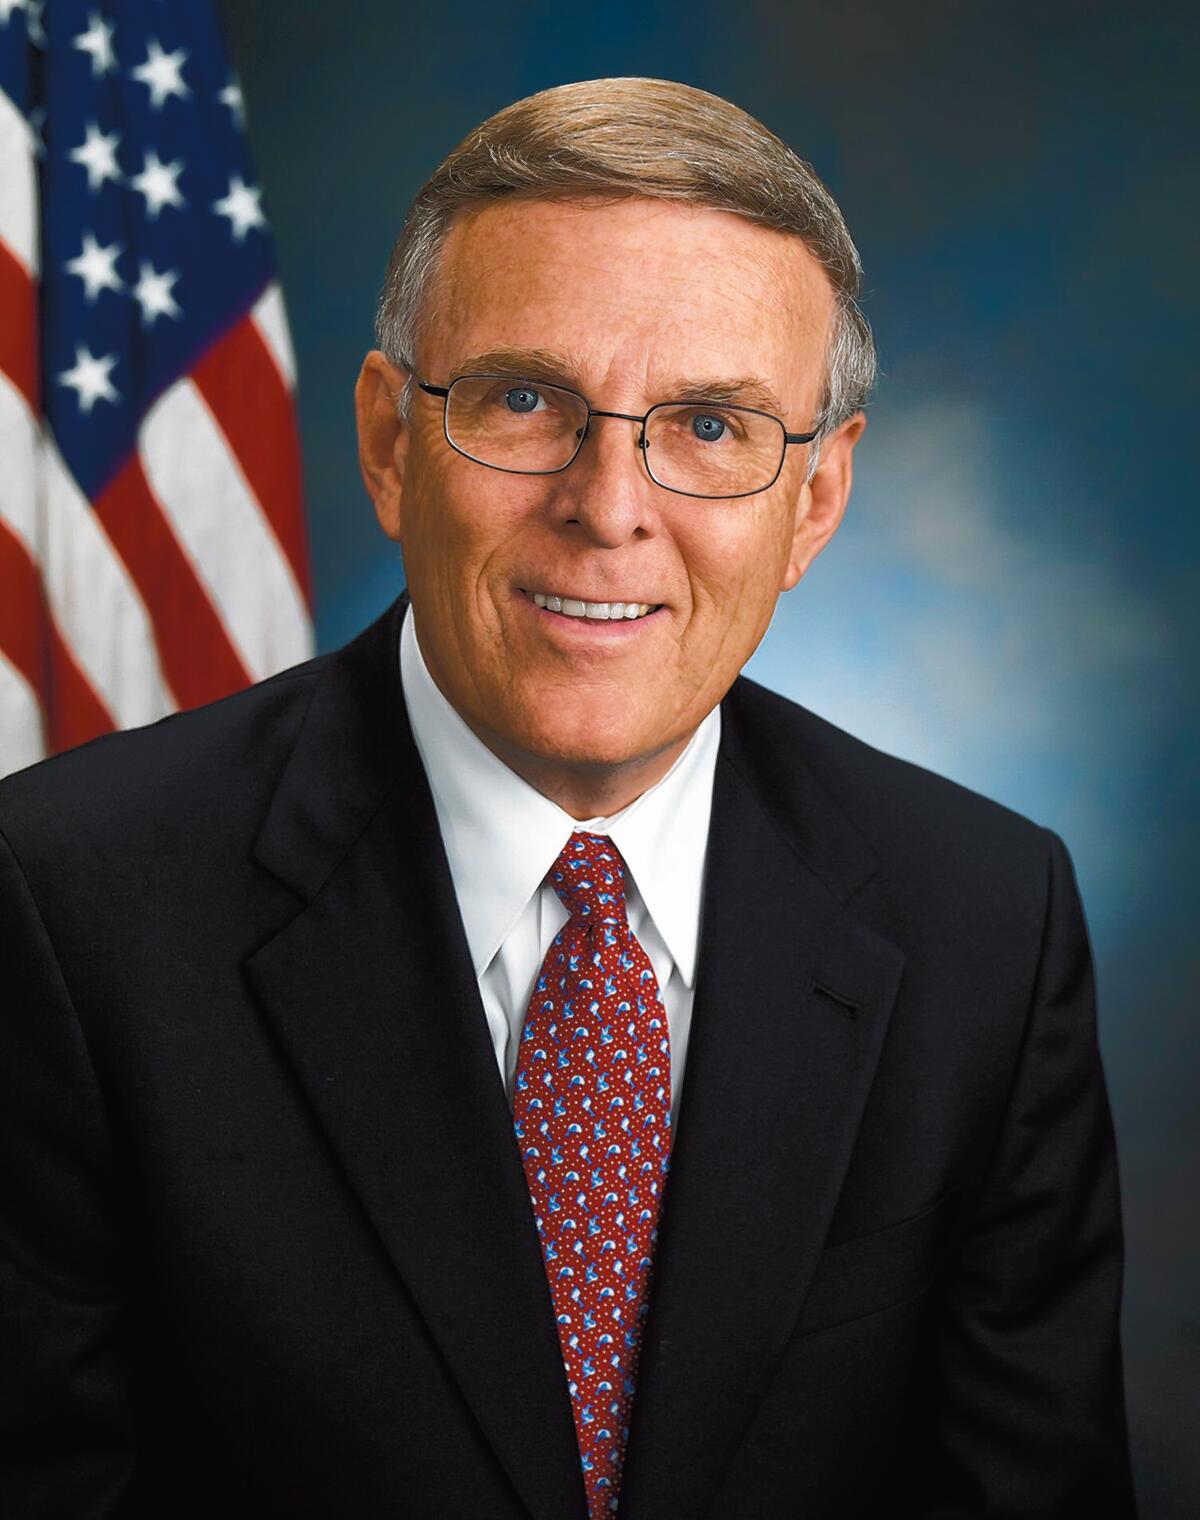 Byron Dorgan (U.S. congressman and senator from North Dakota for 30 years before retiring in January 2011) will discuss his book 'The Girl in the Photograph: The True Story of a Native American Child, Lost and Found in America,' 2 p.m. Saturday, Jan. 18, 2020 at D.G. Wills Books, 7461 Girard Ave., La Jolla.